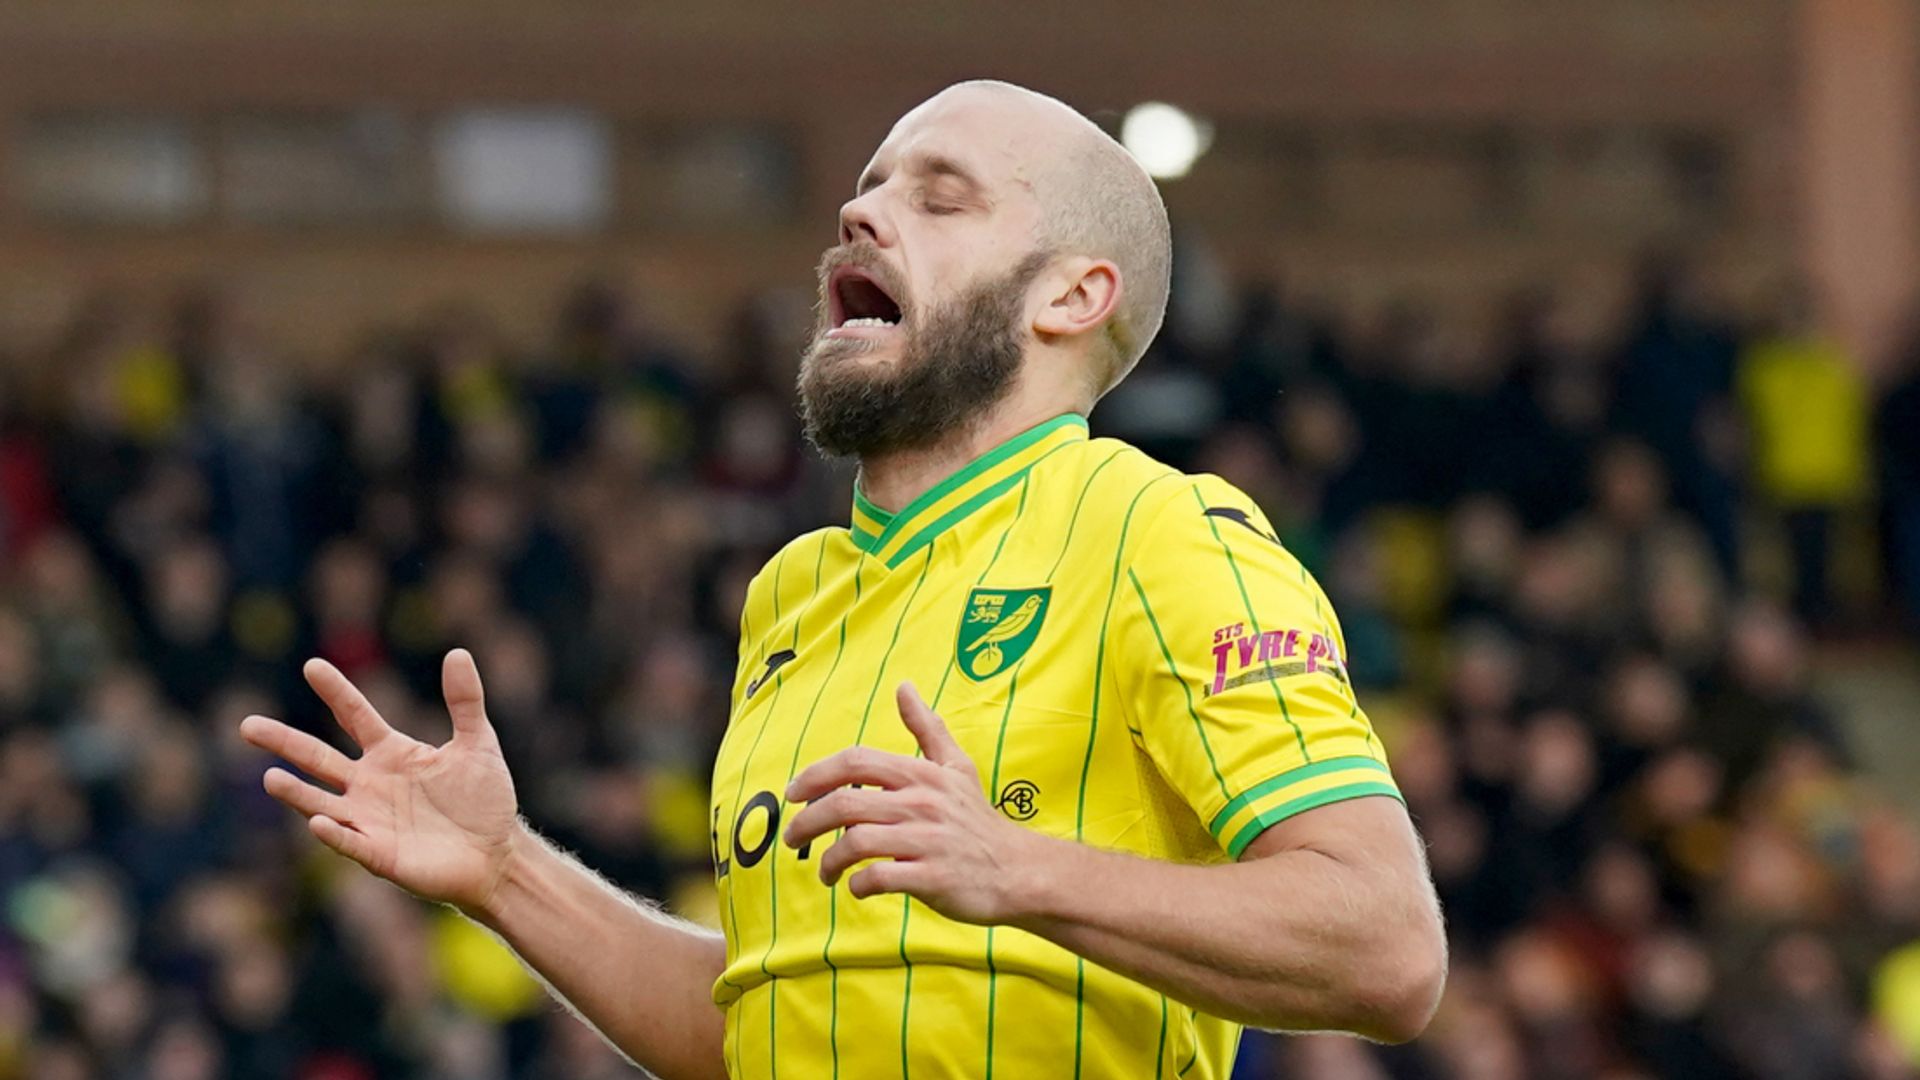 FA Cup round-up: Wagner's Norwich debut ends in exit